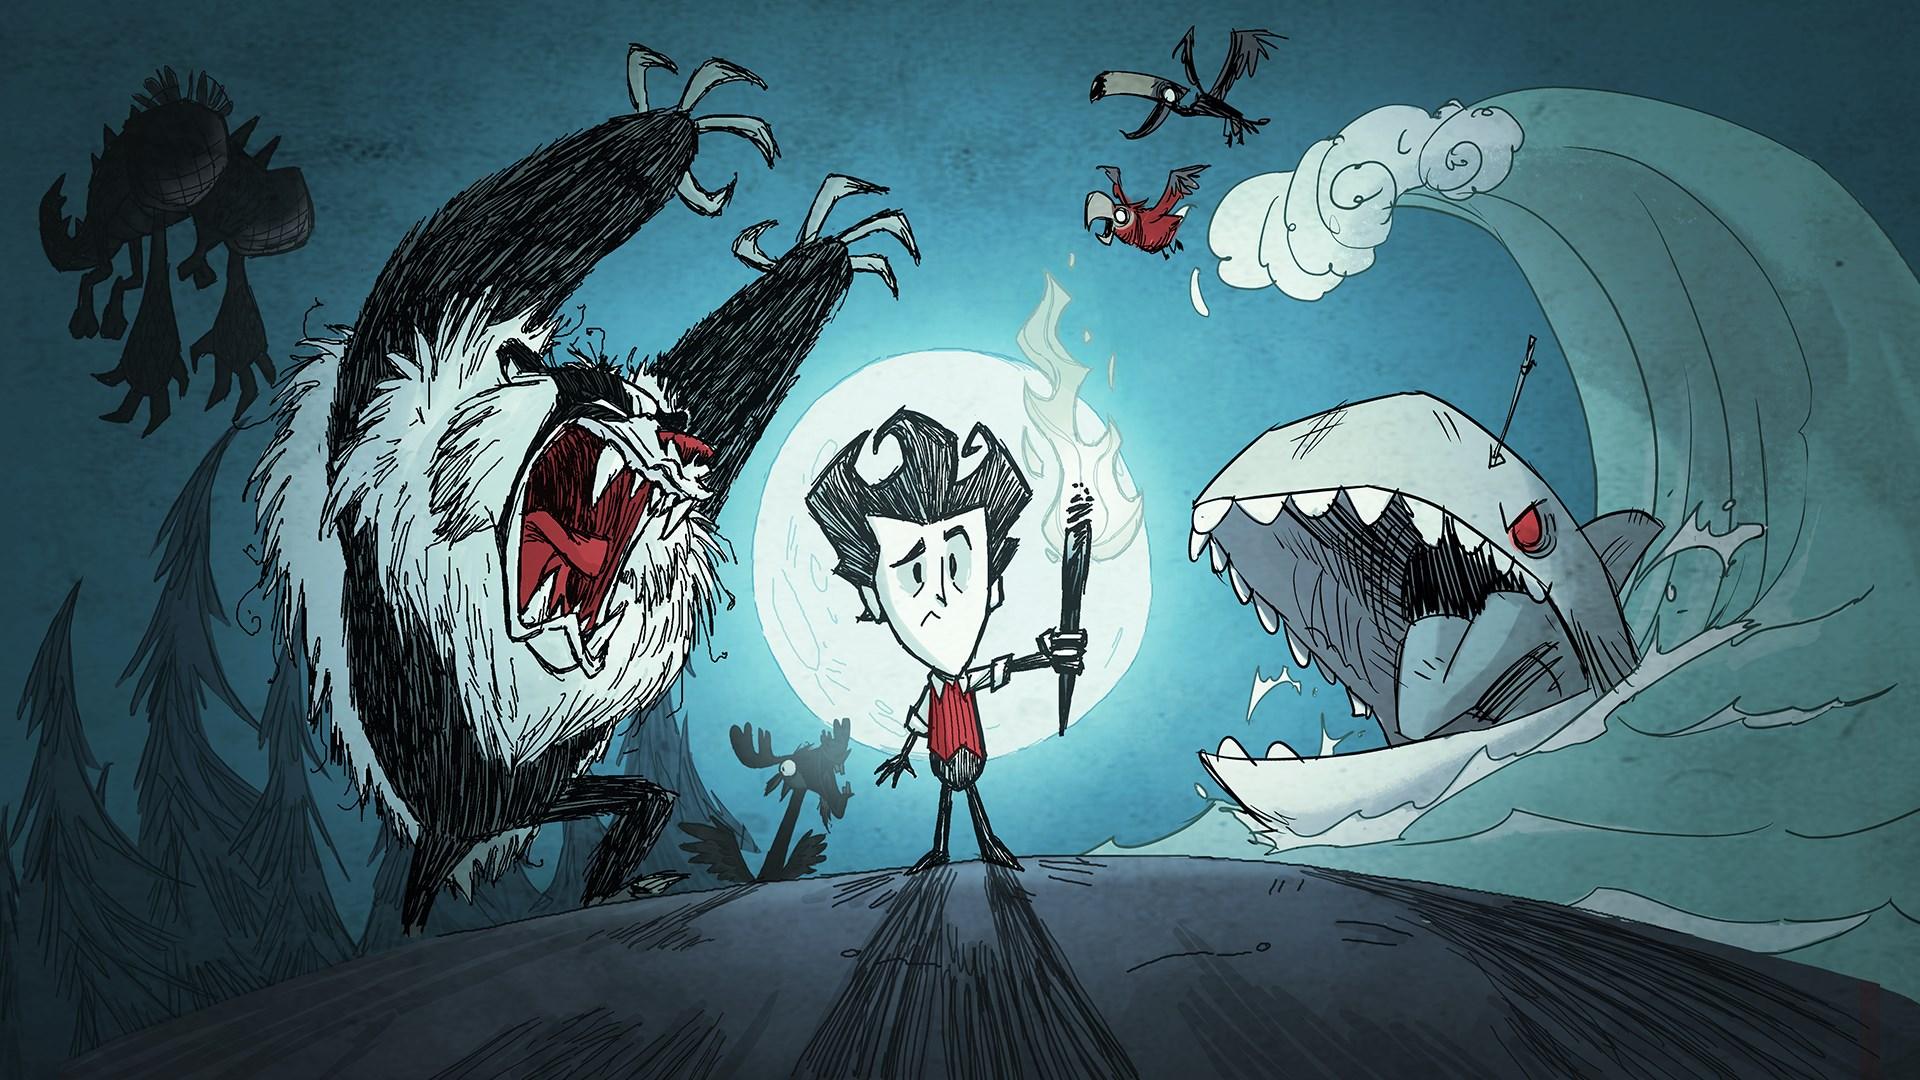 Don T Starve Together Wallpapers Wallpaper Cave